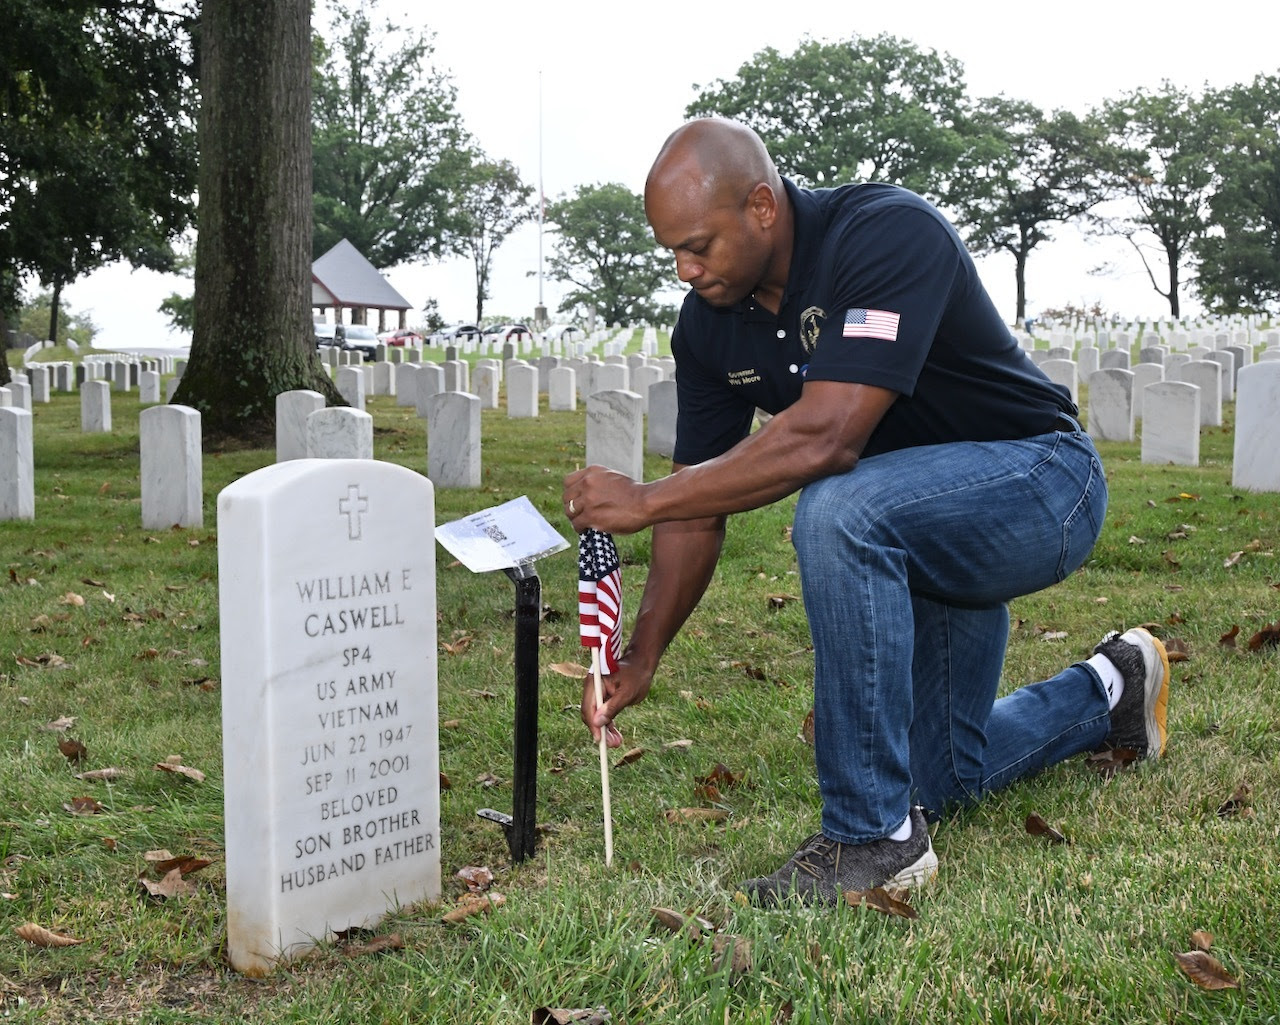 Governor Wes Moore kneeling at grave of William E. Caswell